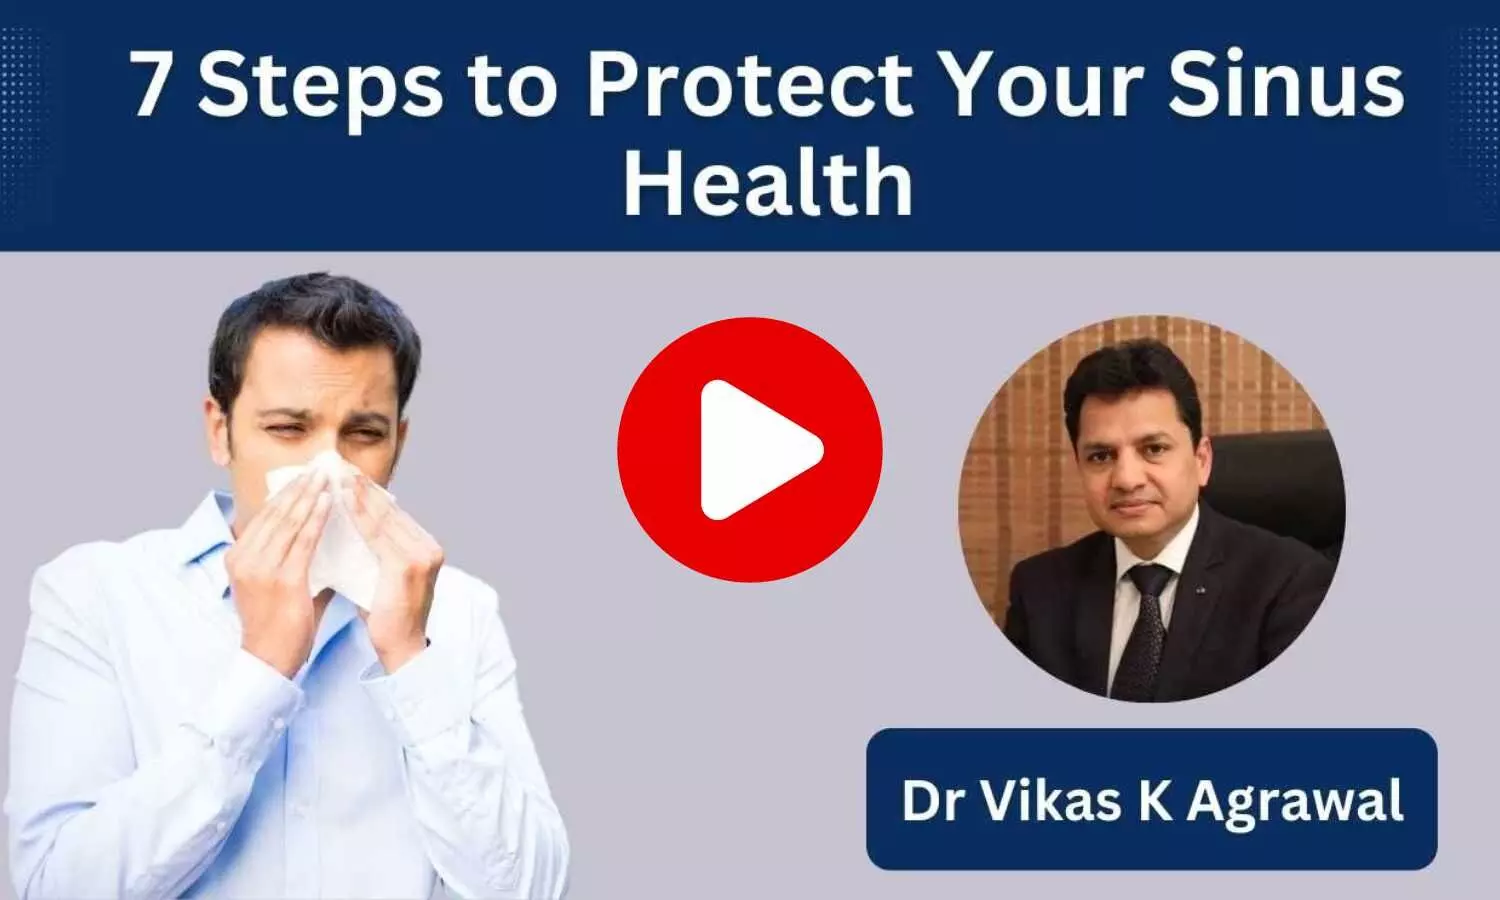 7 Steps to Protect your Sinus Health- Dr Vikas K Agrawal